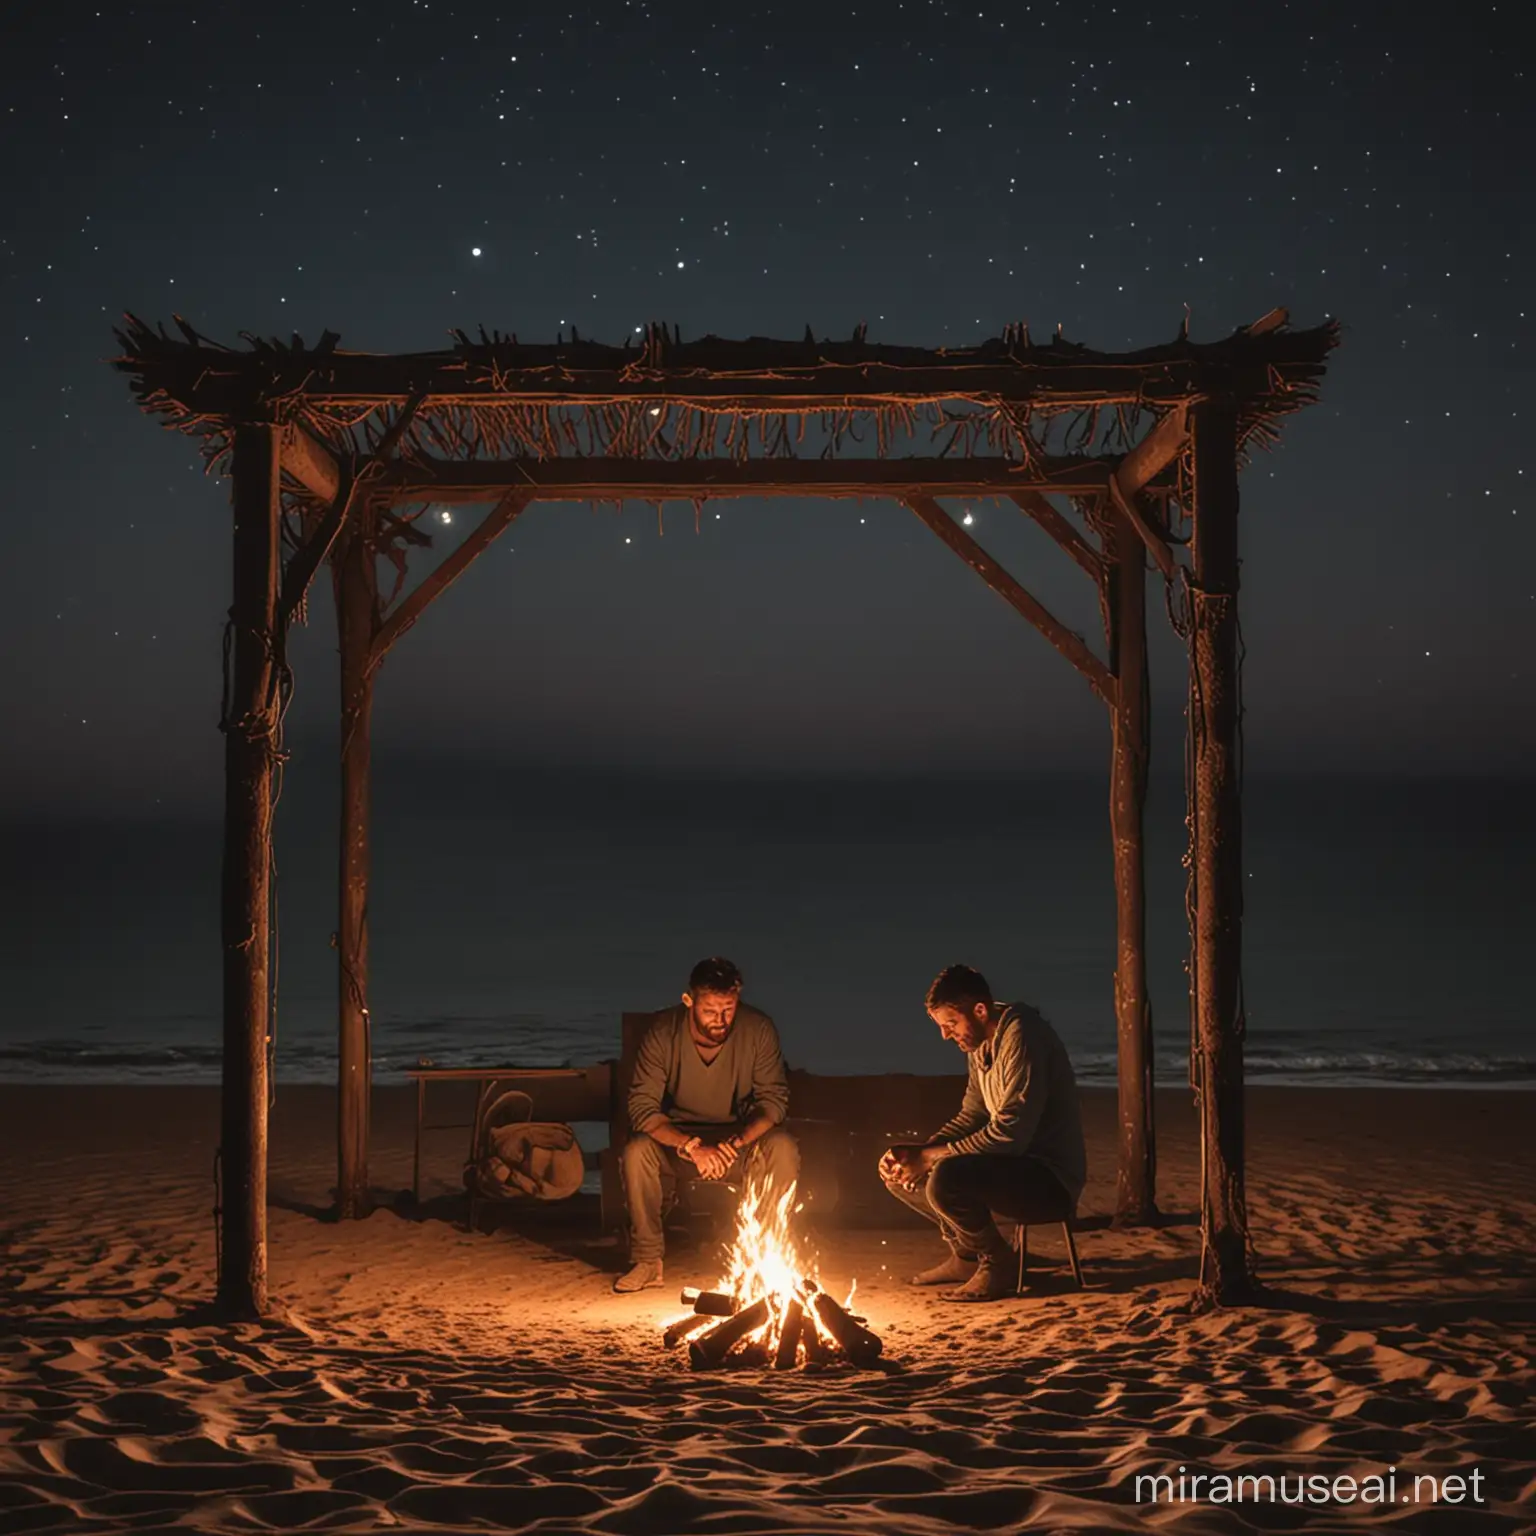 A man sitting on the beach at night on the sand under a rusty iron canopy facing the sea by the fire, hugging his knees and crying.